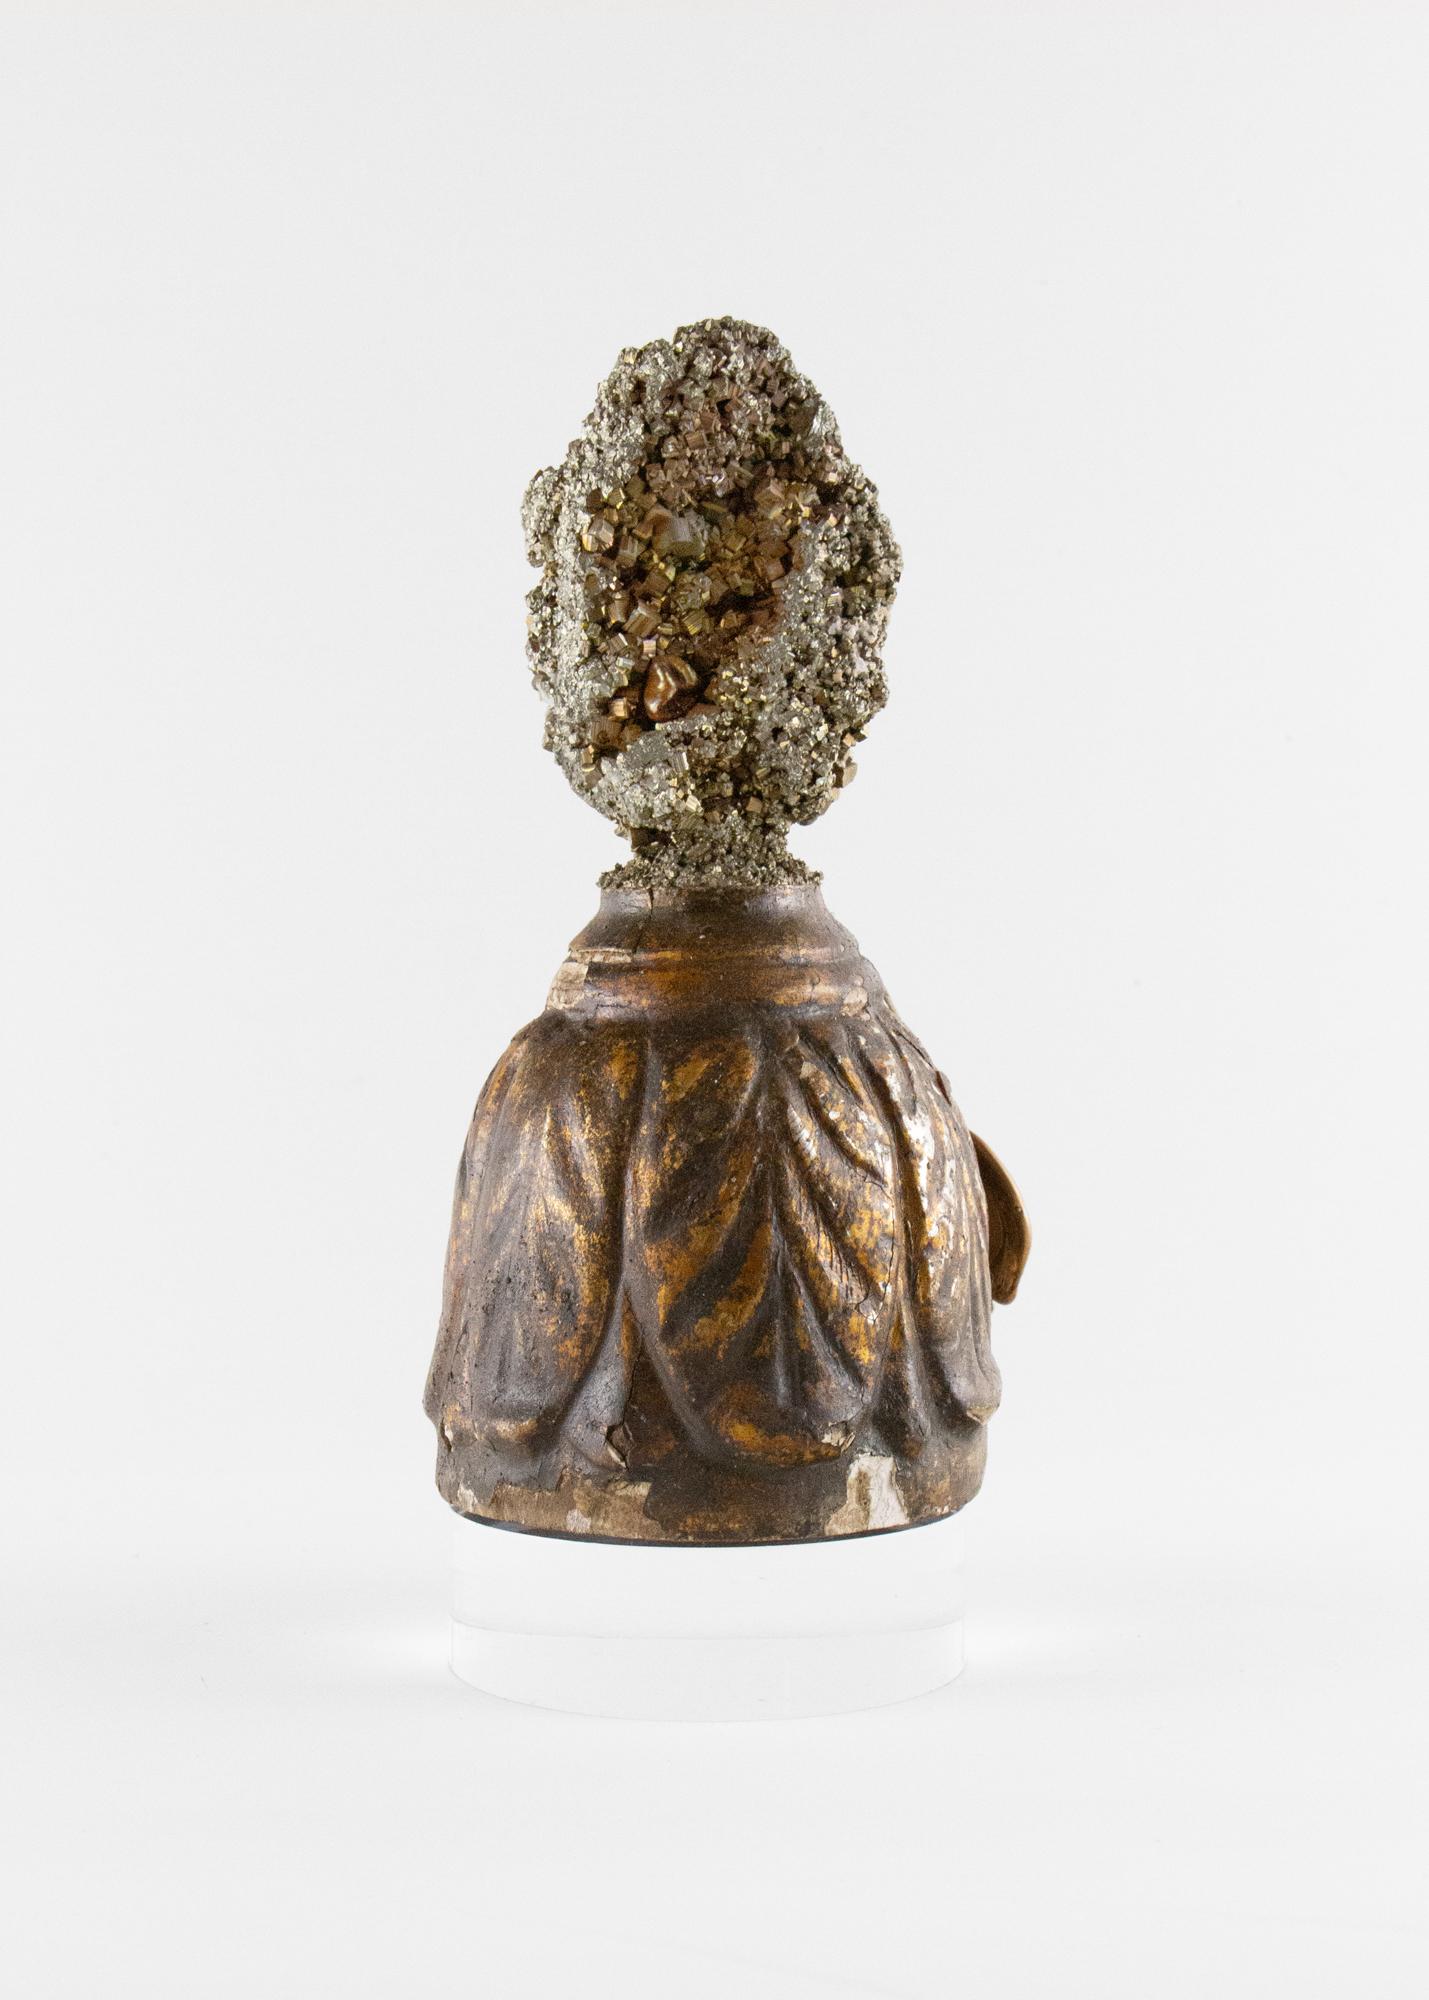 Sculptural 18th century Italian fragment base with coordinating pyrite and a baroque pearl on a lucite base. The fragment was originally part of a hand-carved piece in a historical Italian church in Italy. It is paired with pyrite, adorned with a